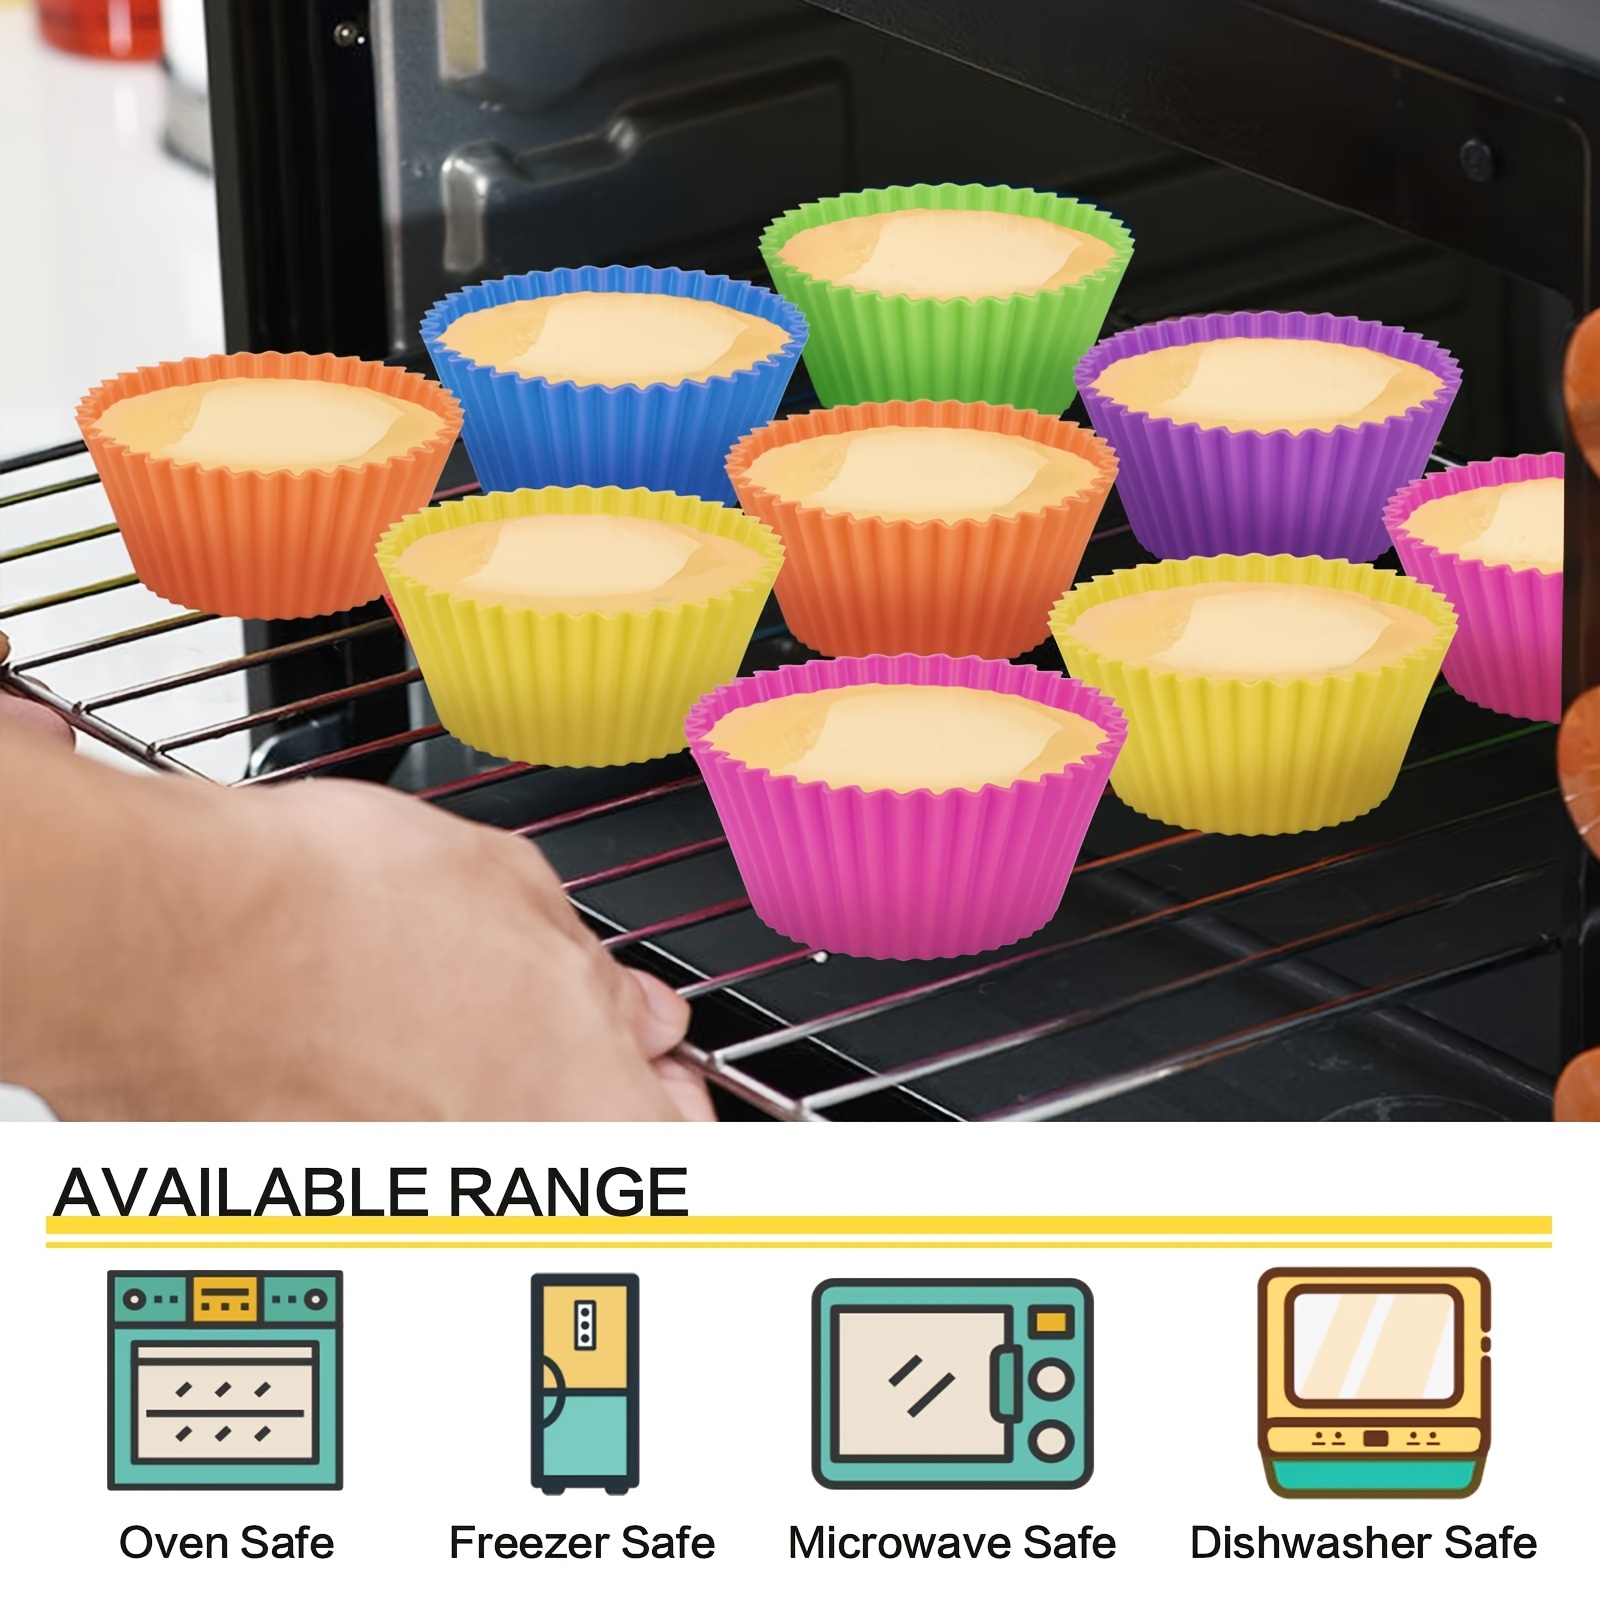 Pantry Elements Silicone Cupcake Liners/Baking Cups - 12 Vibrant Muffin Molds